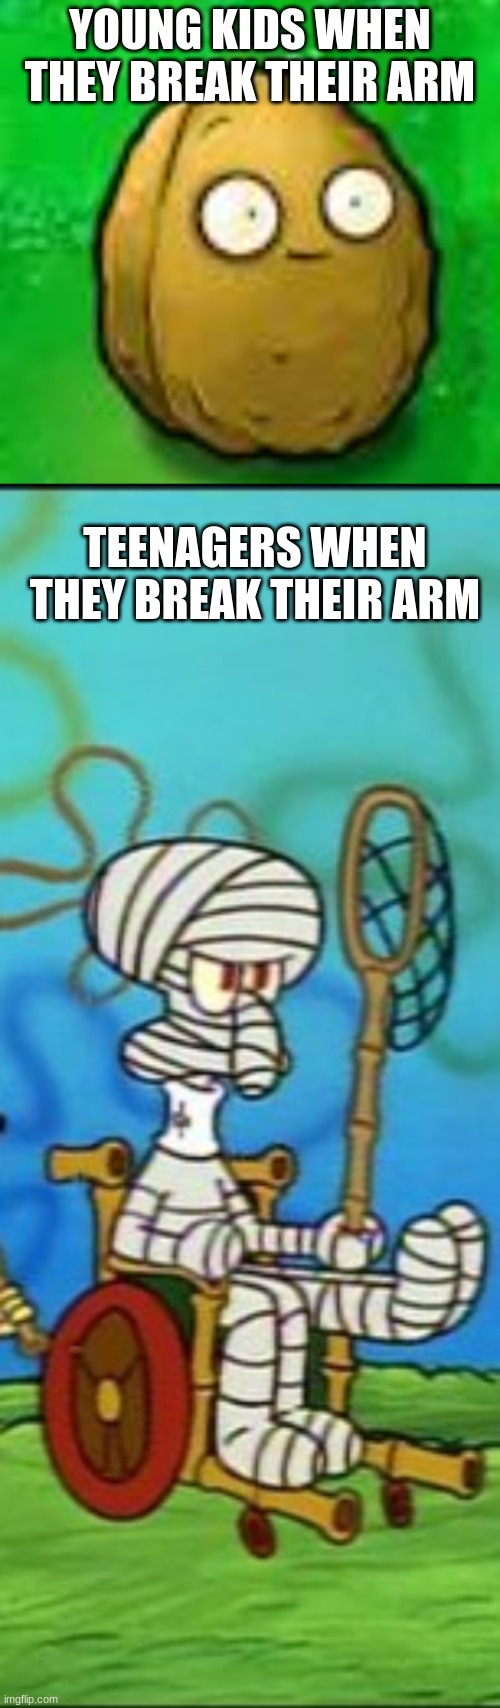 YOUNG KIDS WHEN THEY BREAK THEIR ARM; TEENAGERS WHEN THEY BREAK THEIR ARM | image tagged in arm,e,meme | made w/ Imgflip meme maker